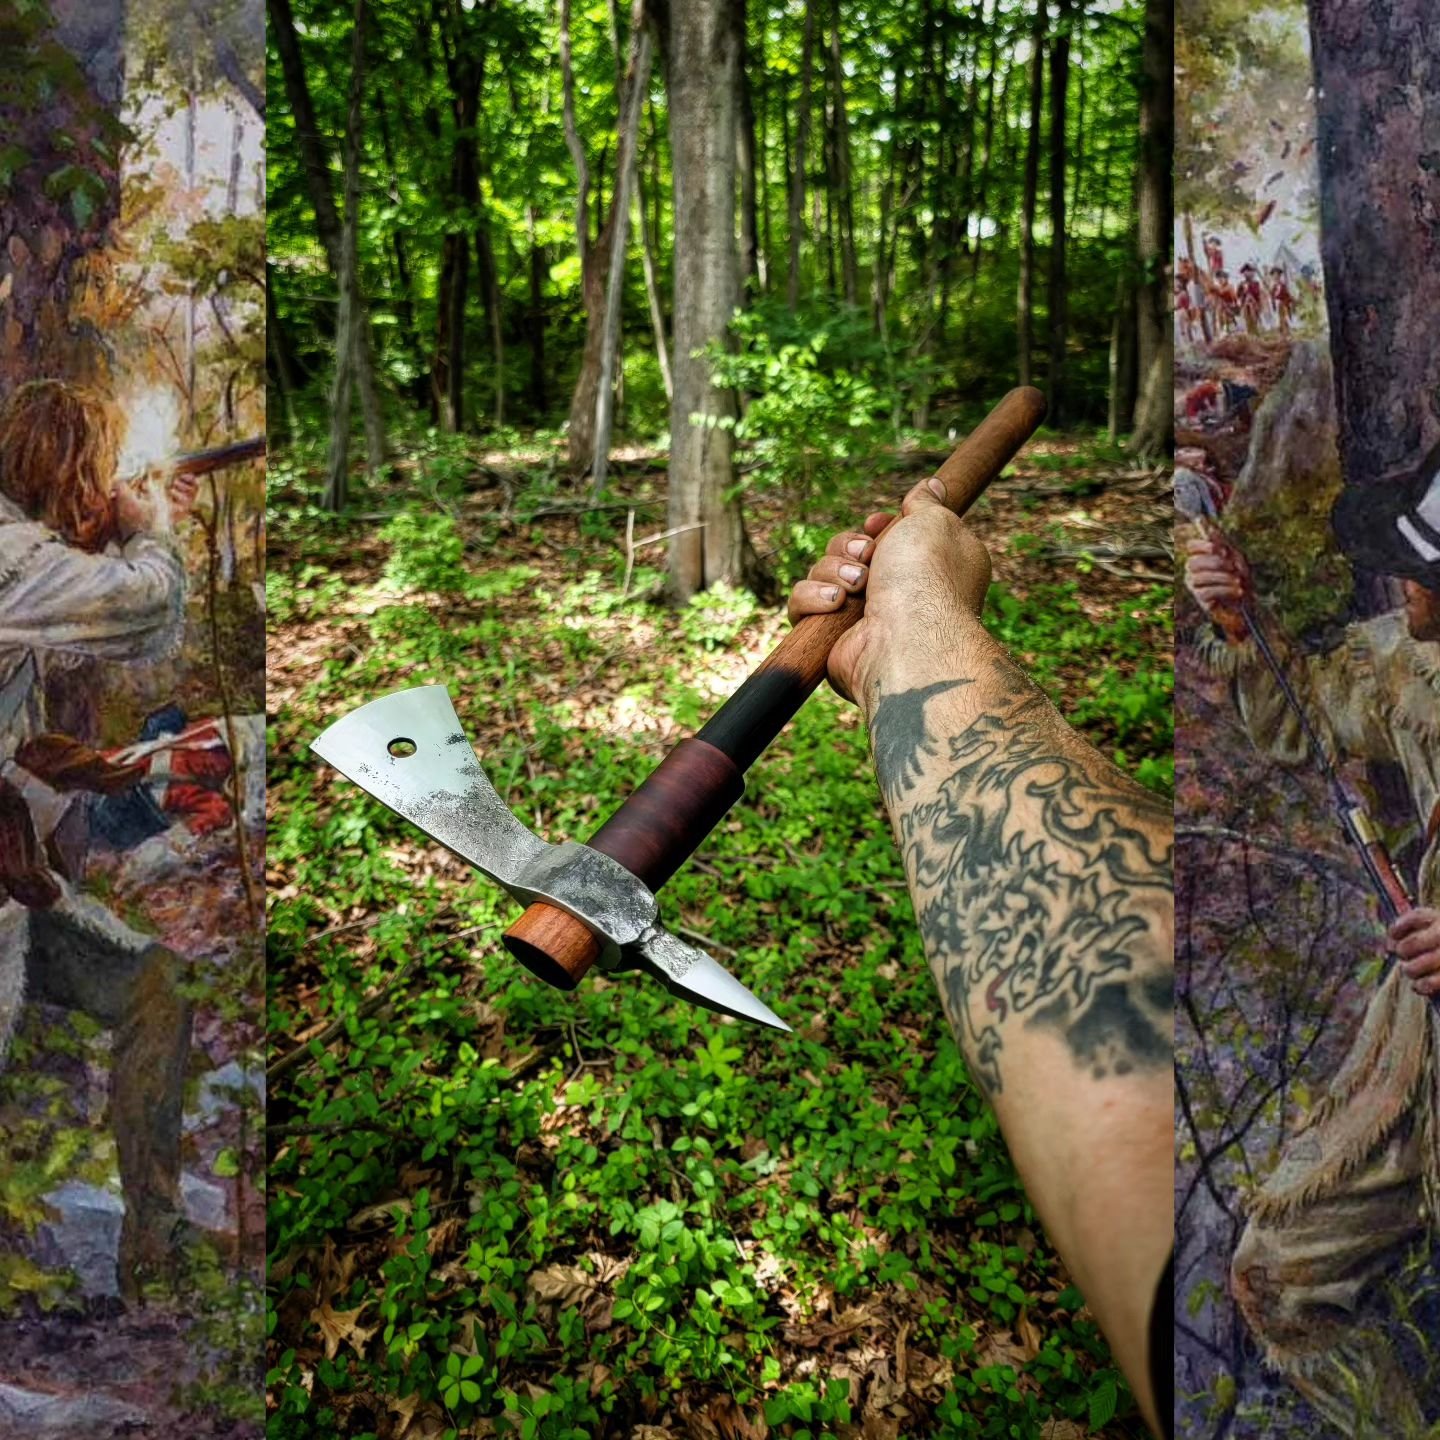 Woodland sneakin

#traditional #historical #tools #axes #forged #handcrafted #handmadeusa #native #history